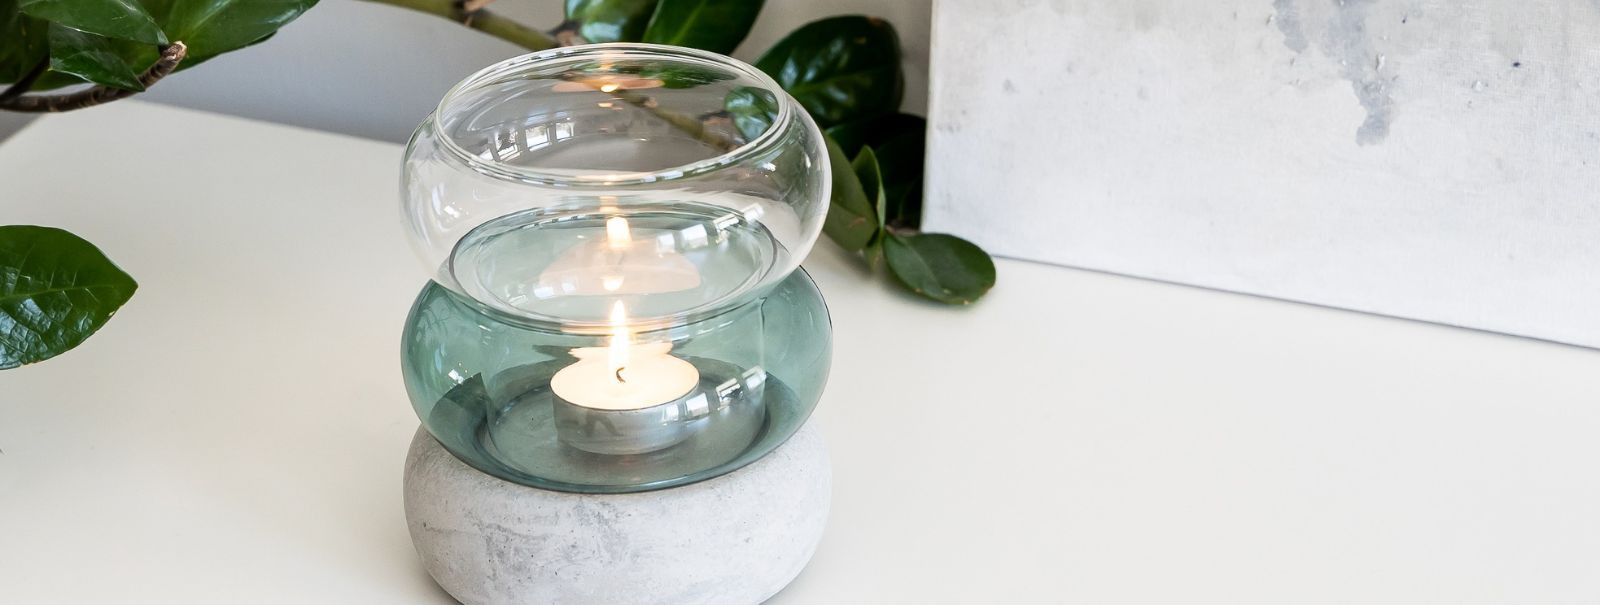 The sense of smell is deeply connected to our emotions and memories, making it a powerful tool for creating a cozy atmosphere at home. Scented candles, with the